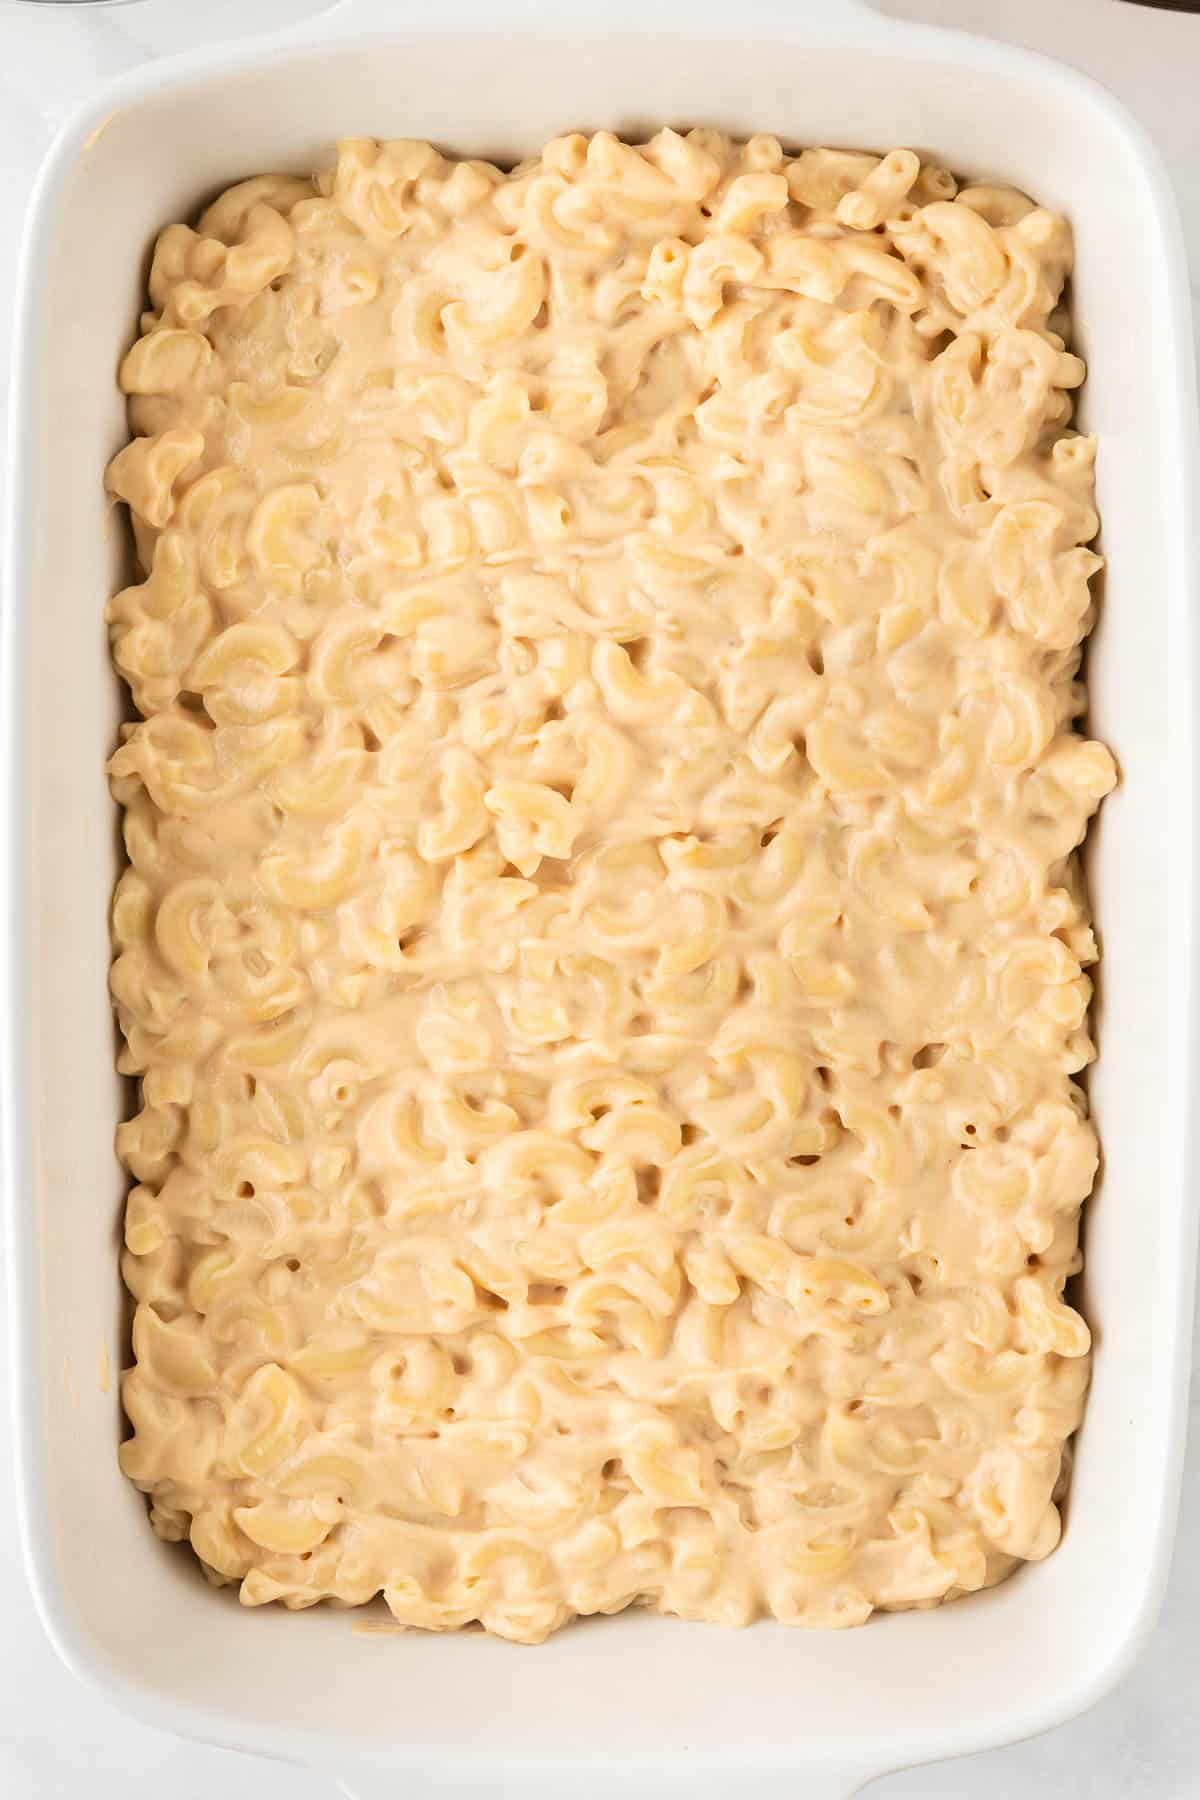 mac and cheese spread out in a baking dish